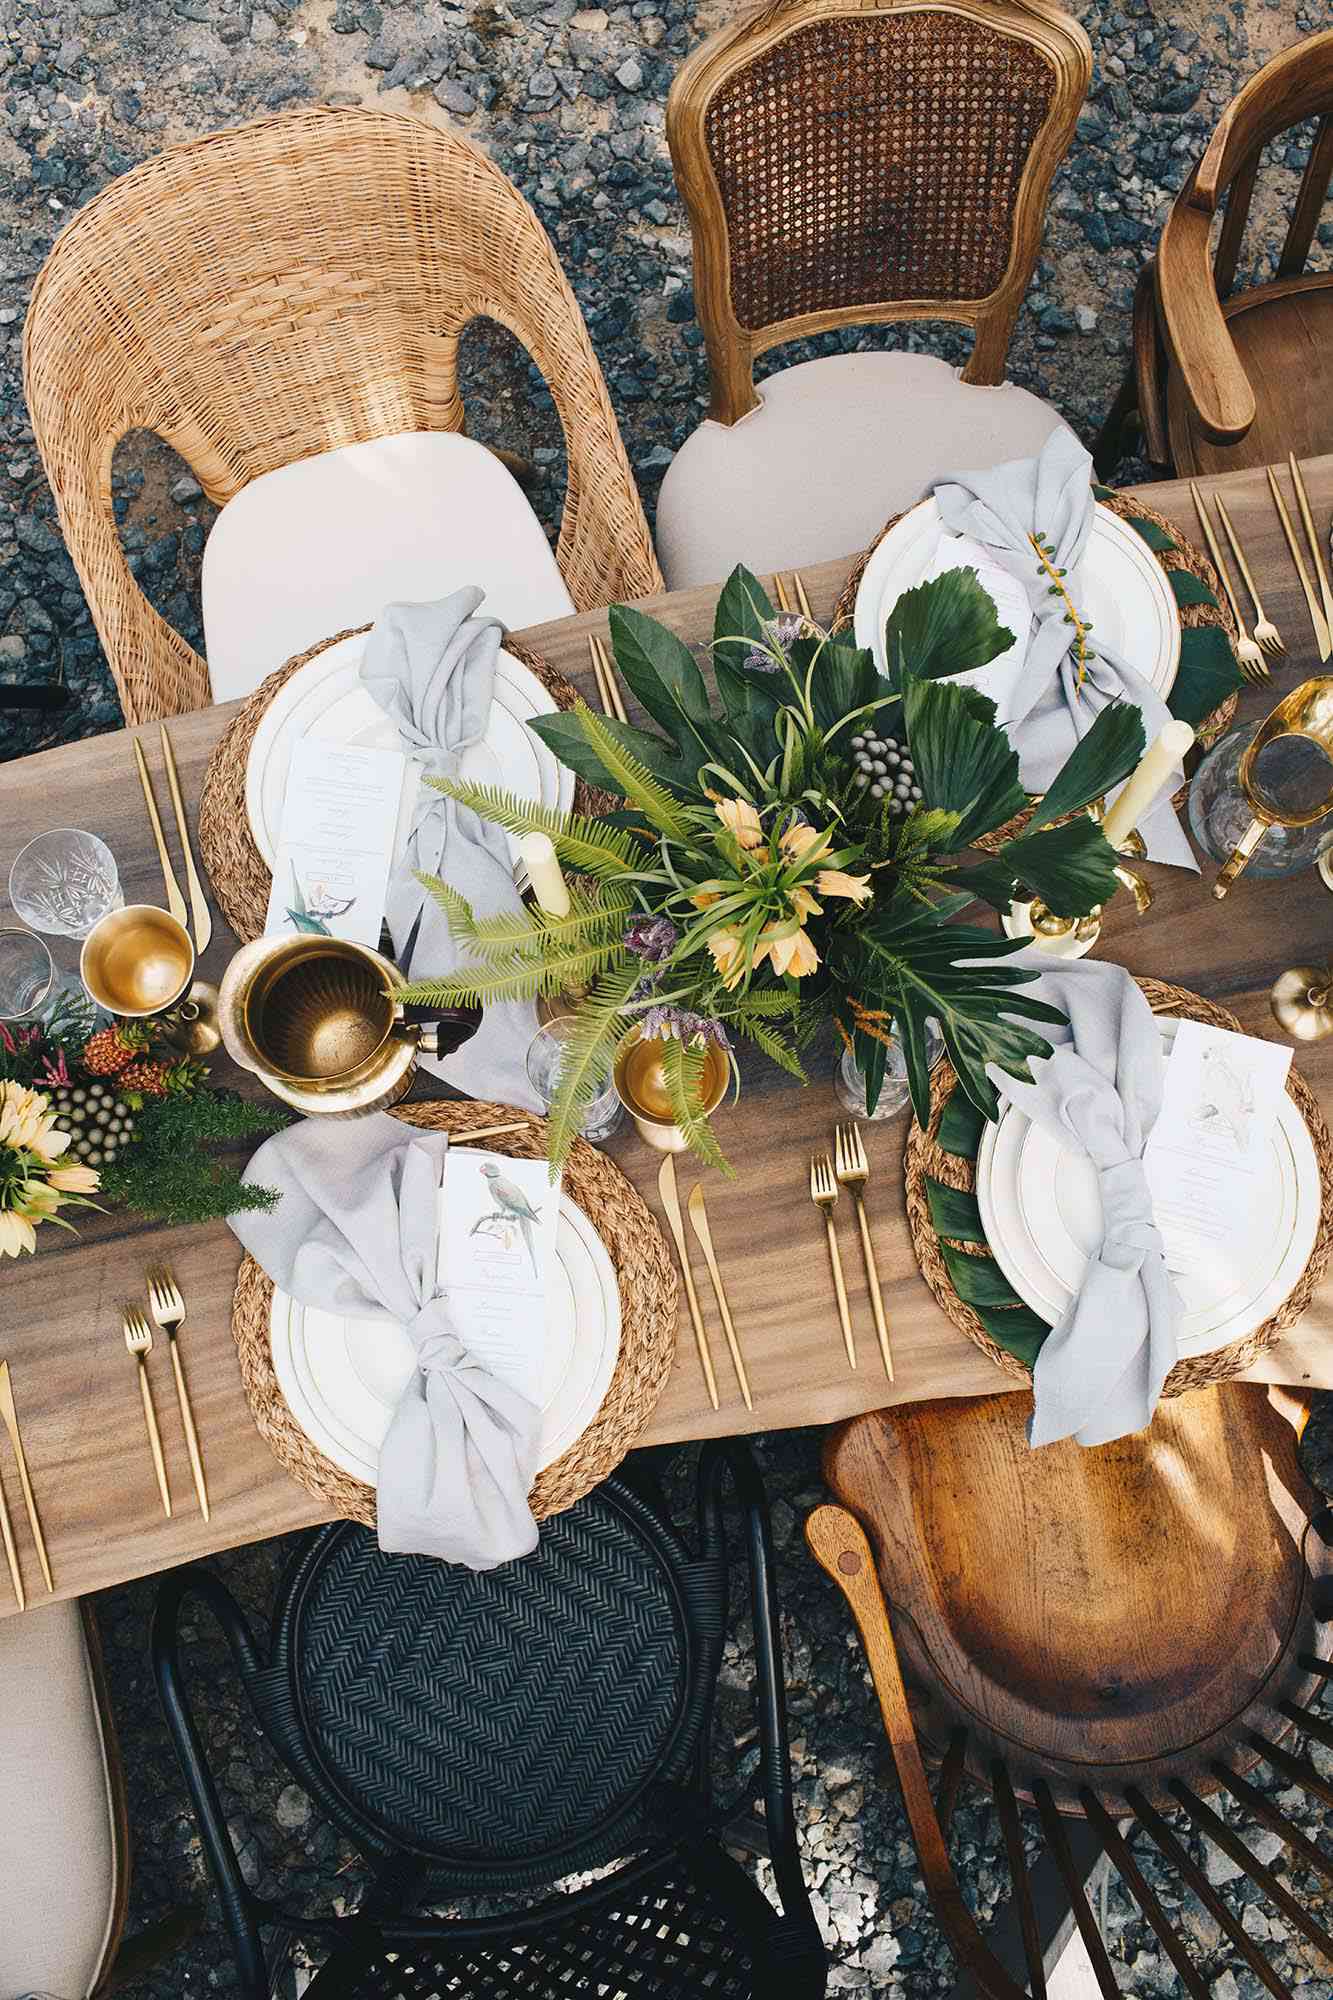 tablescape with rattan accents and tropical floral arrangements